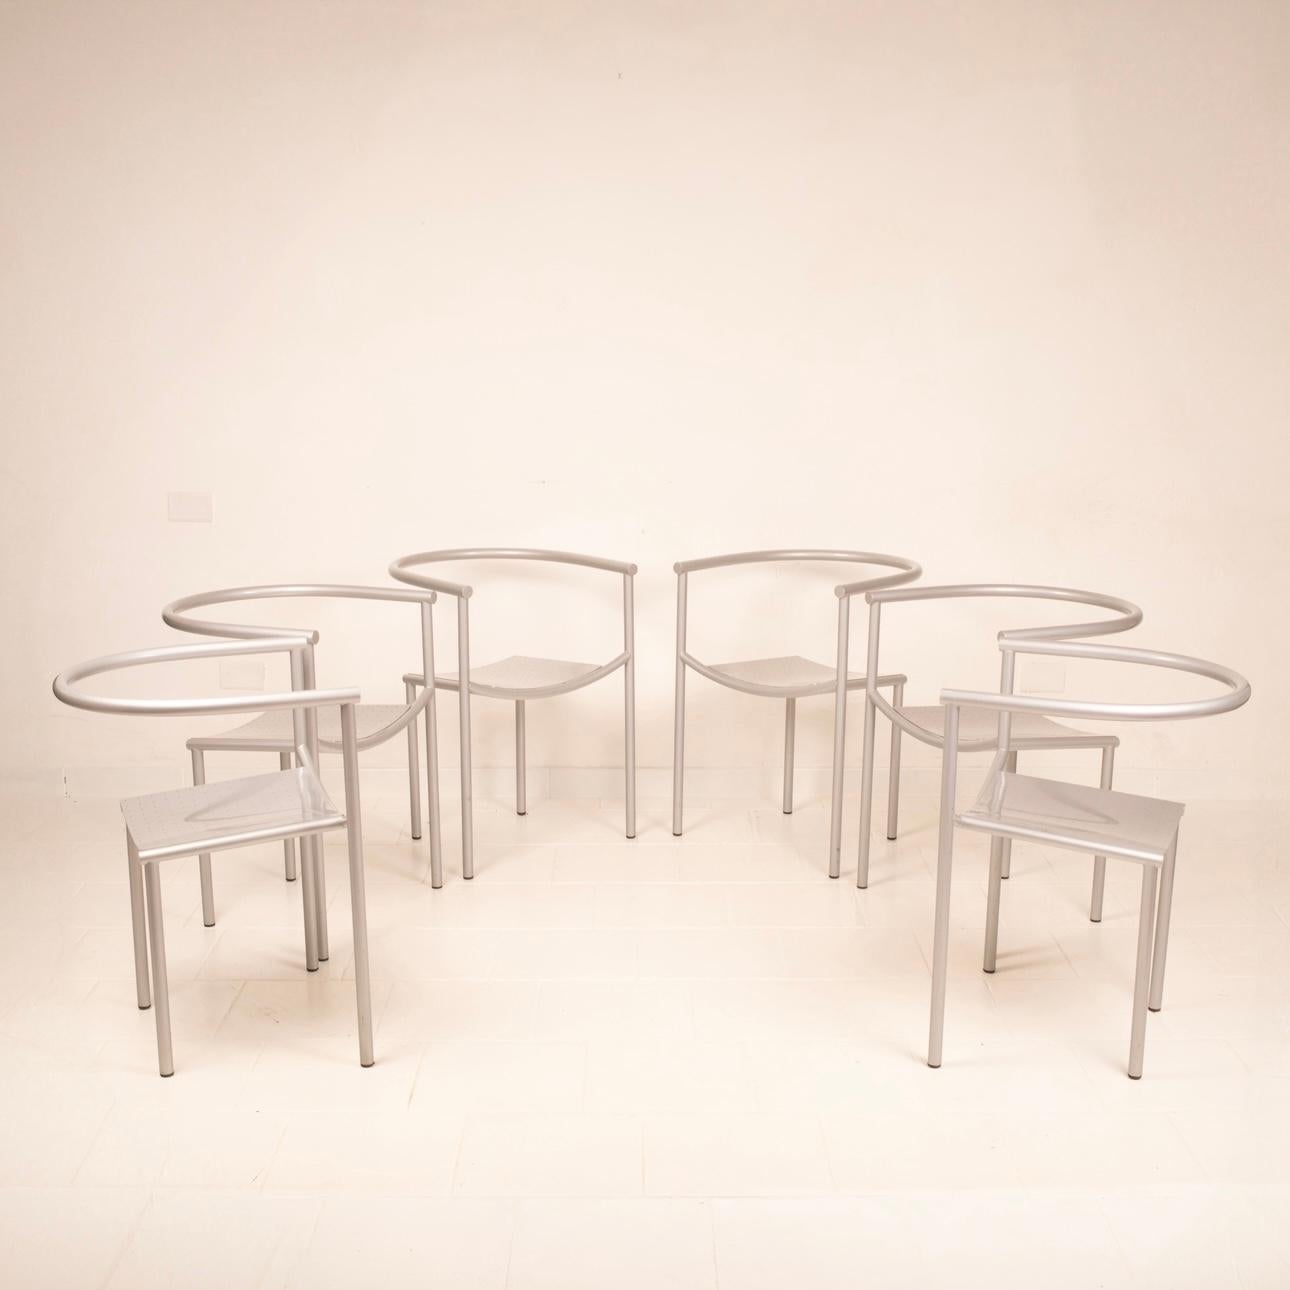 Stunning set of 6 postmodern Von Vogelsang chairs designed by Philippe Starck in 1985 and manufactured by Driade.
They are made of tubular steel and perforated steel sheet painted gray. 
They are minimalist design chairs that are extremely